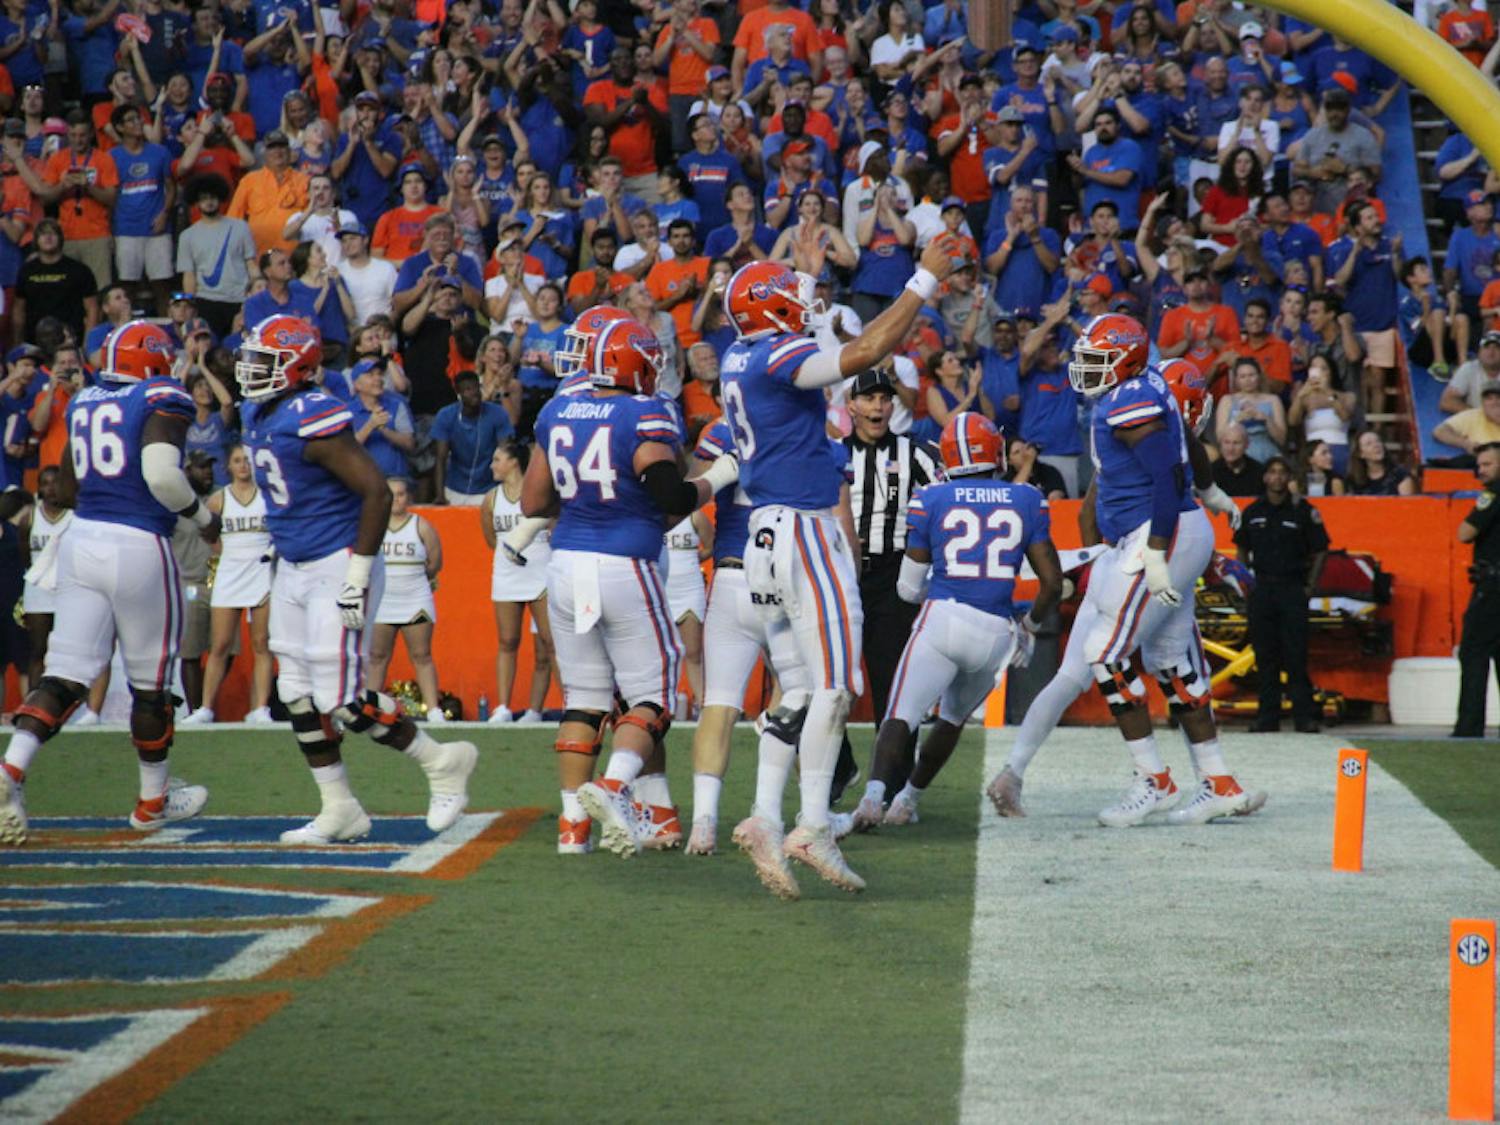 Quarterback Feleipe Franks said the Gators' win over Charleston Southern was one of the more fun games he has been a part of.&nbsp;“Guys are getting excited when we score,” he said.